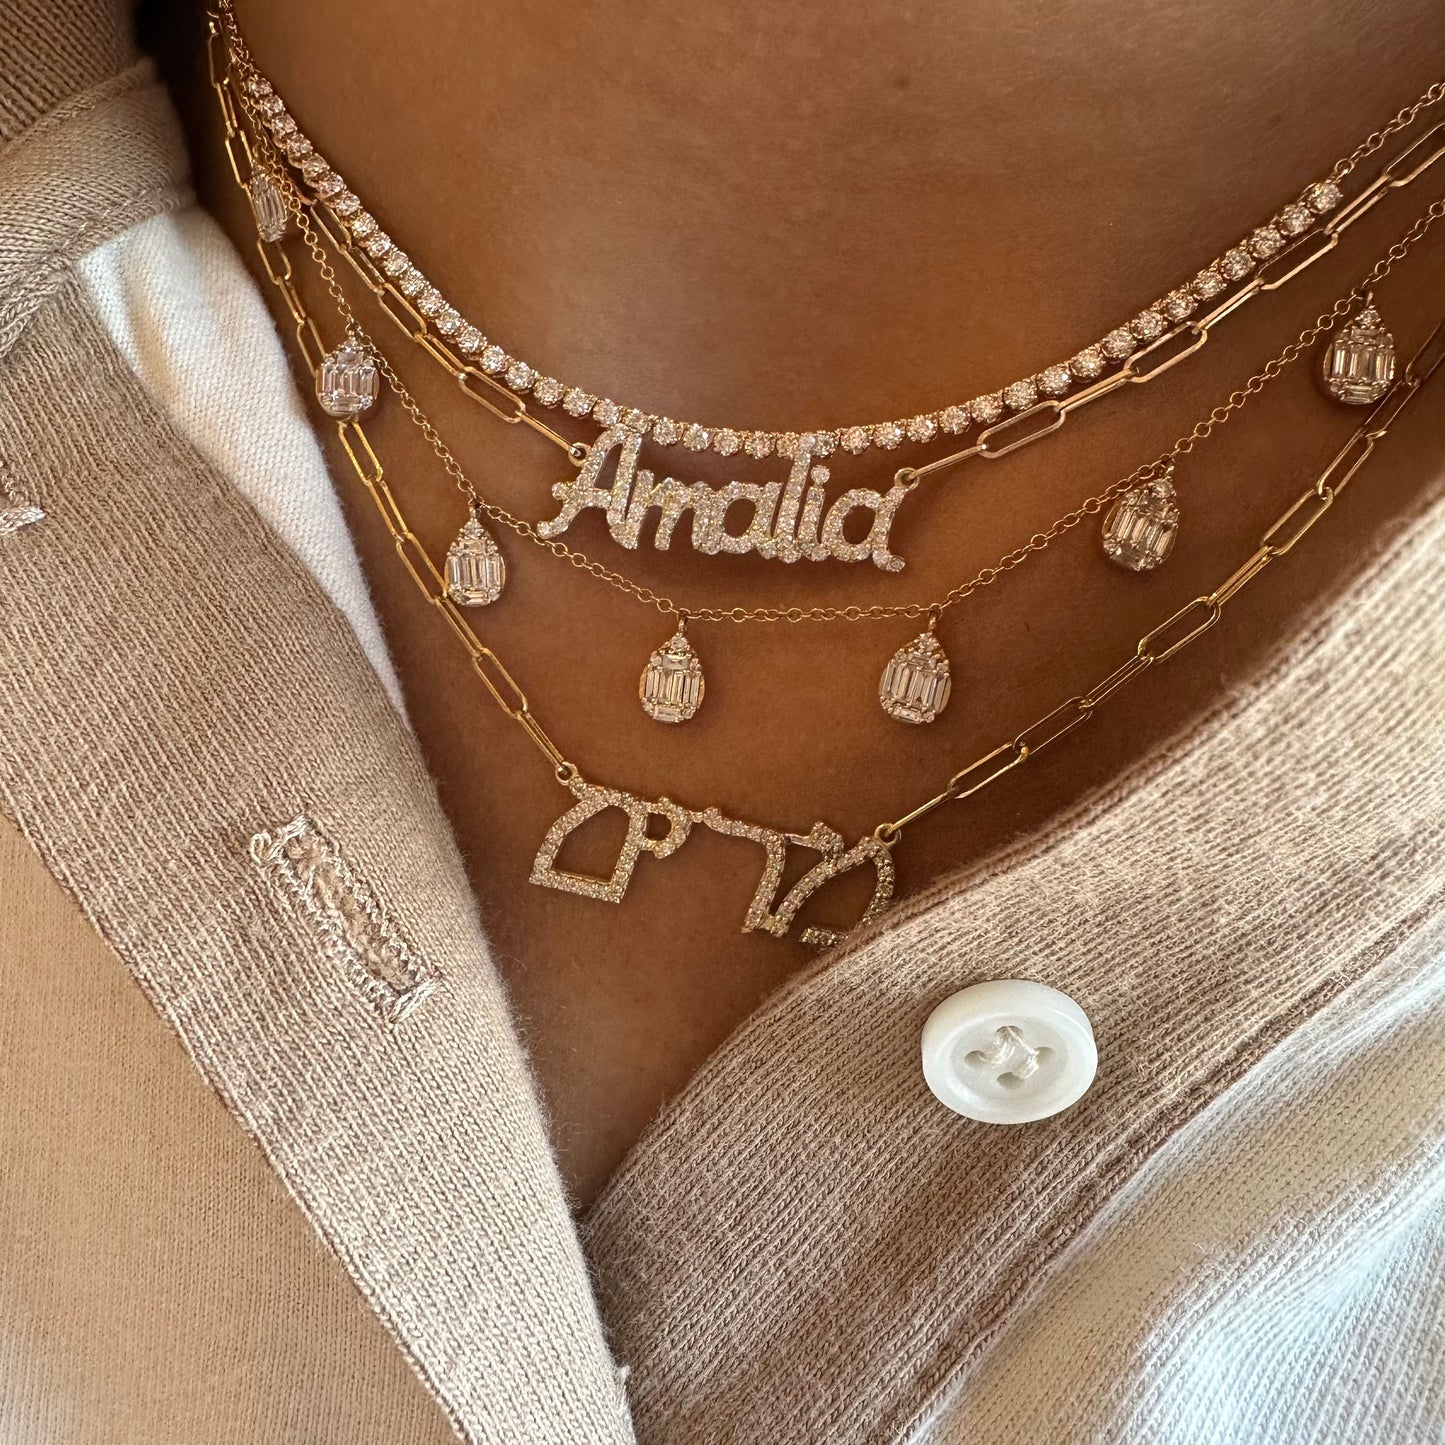 Diamond Name Necklace on Baby Rectangle Chain